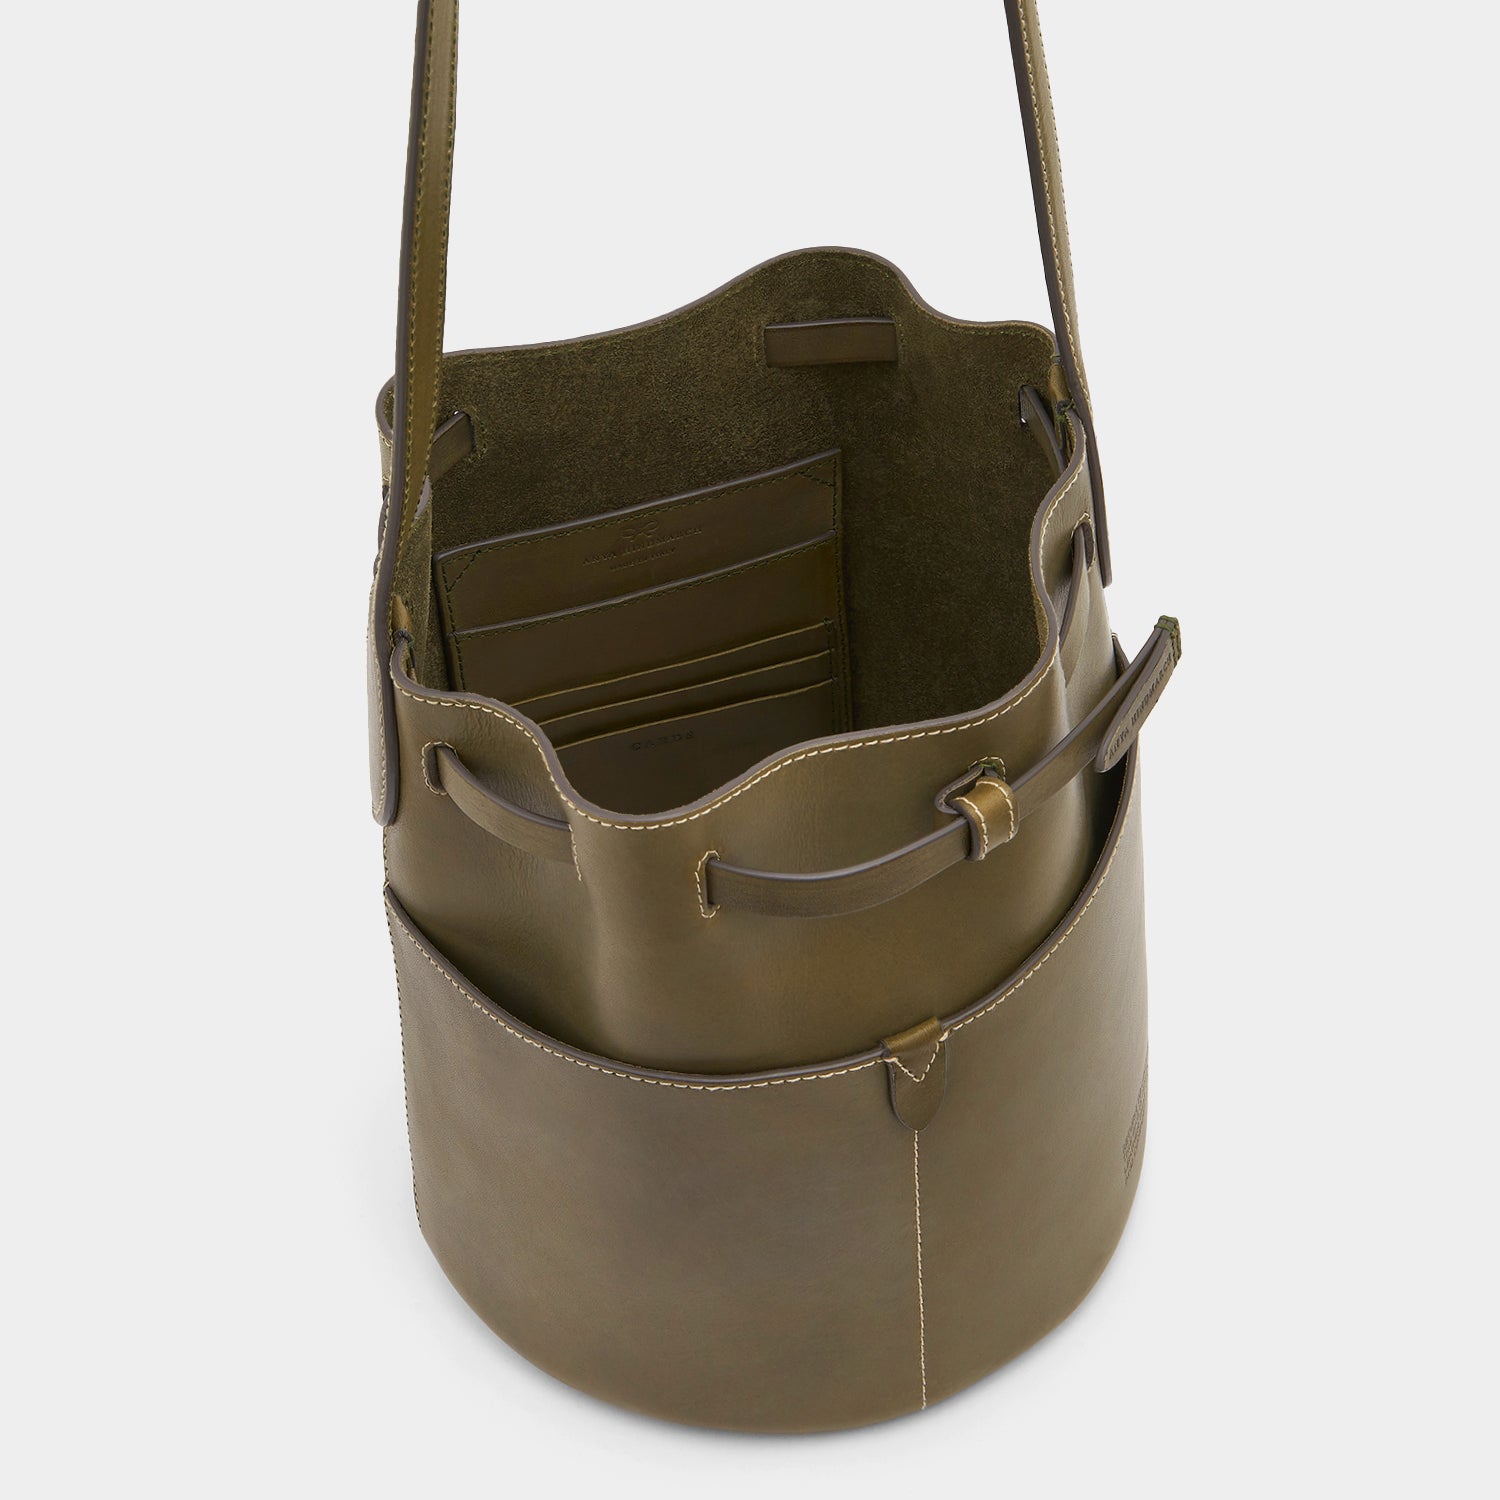 Return to Nature Small Bucket Bag -

                  
                    Compostable Leather in Fern -
                  

                  Anya Hindmarch EU
